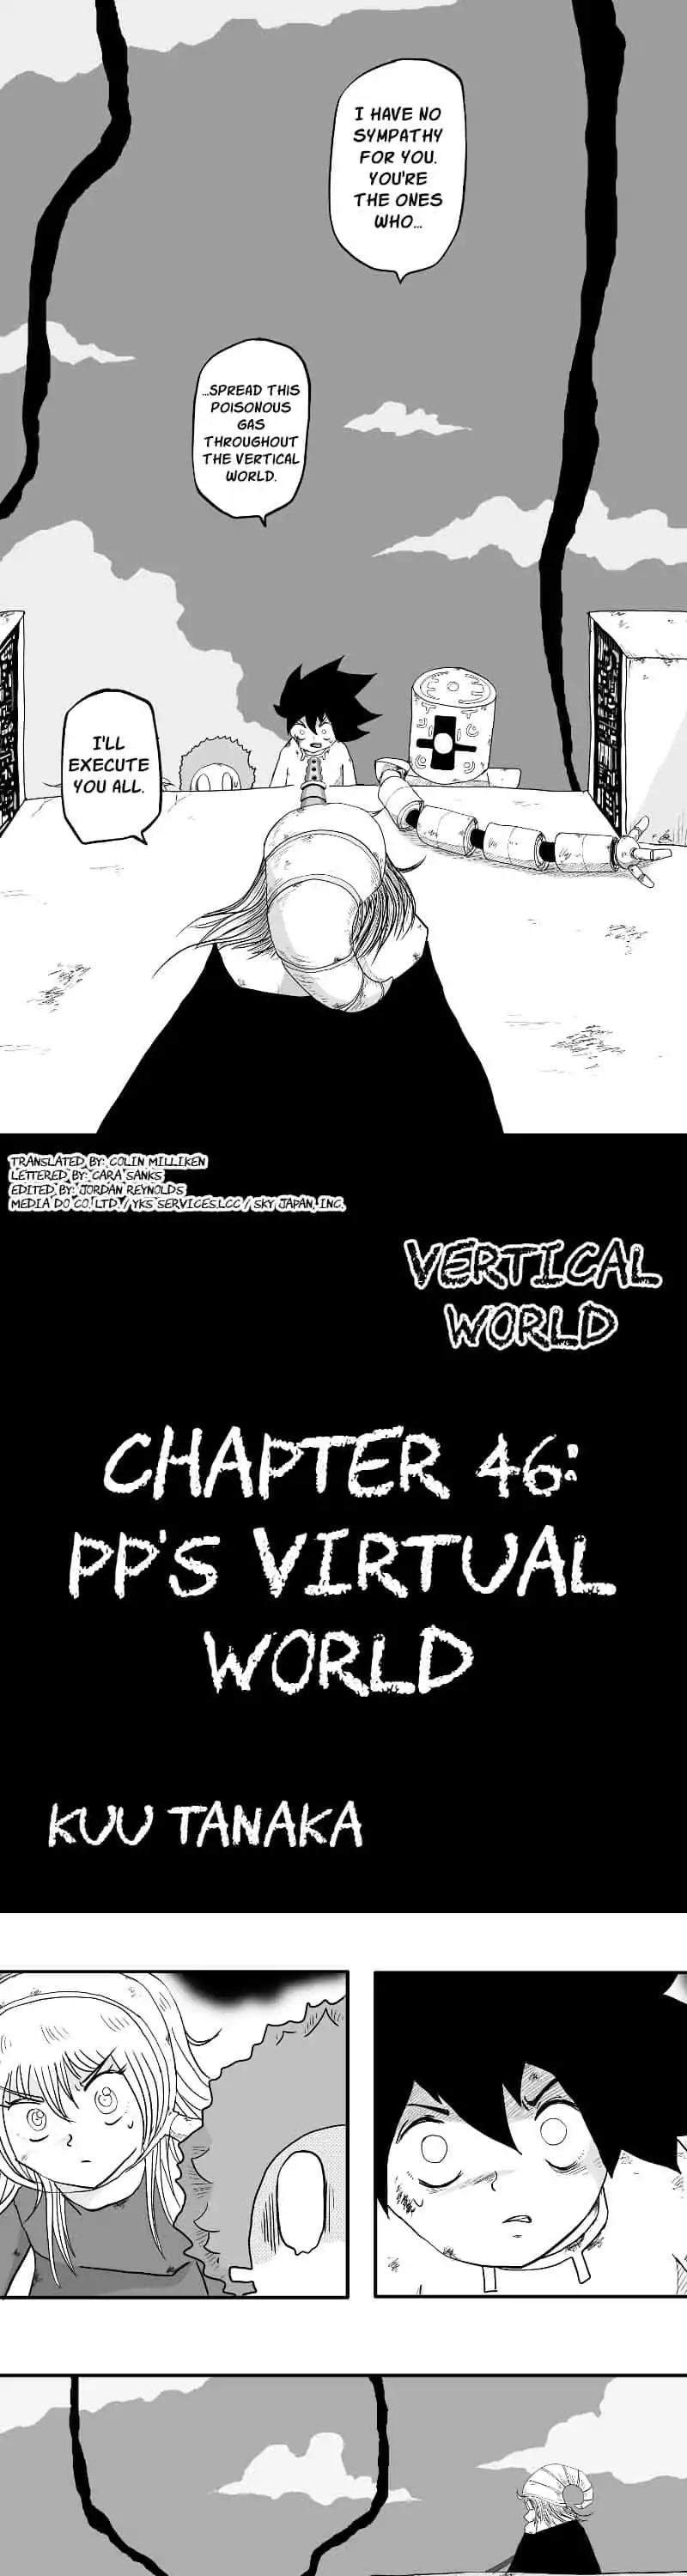 The Vertical Country Chapter 46: